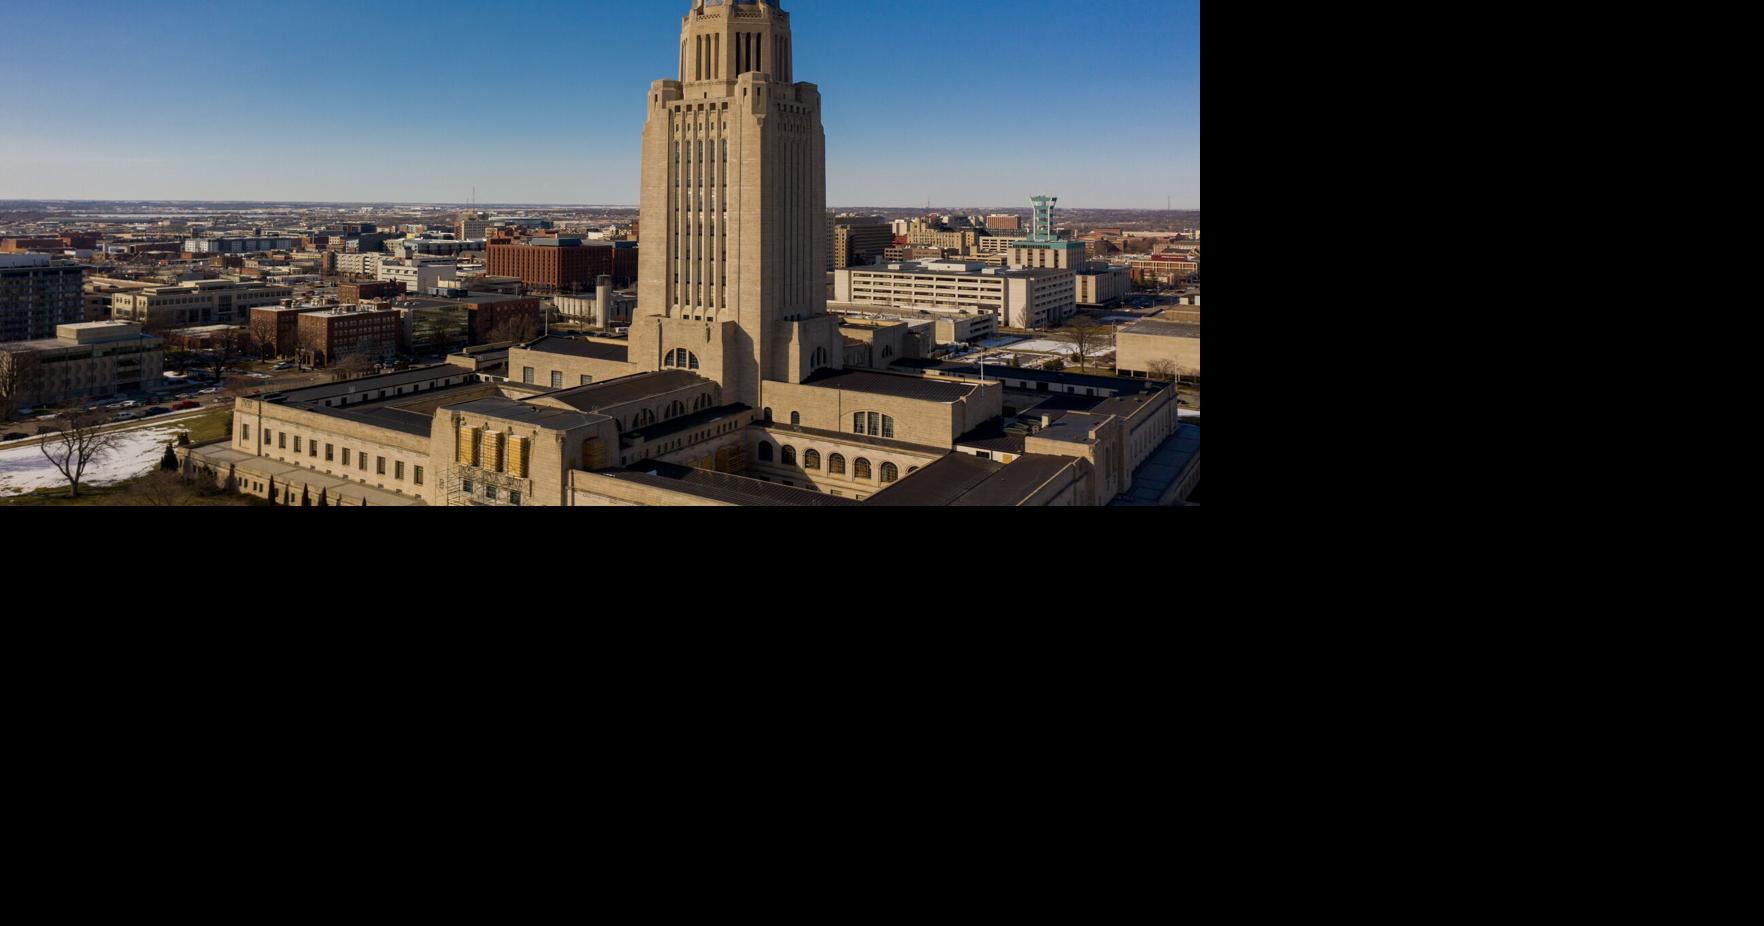 Nebraska ends fiscal year with record $6.35 billion revenues